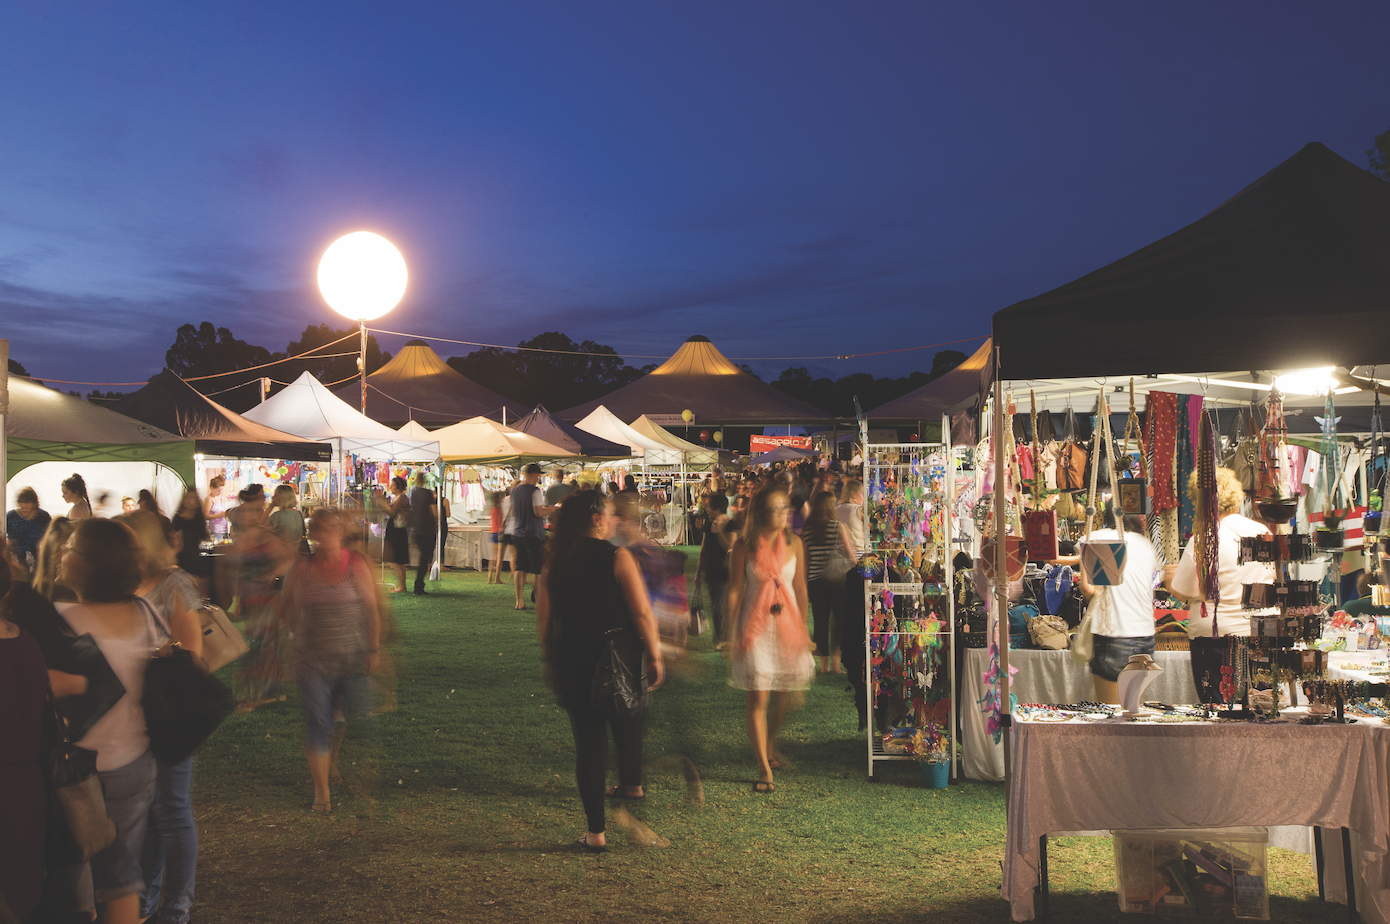 The Moonlight Markets: a charming local tradition in Campbelltown South Australia